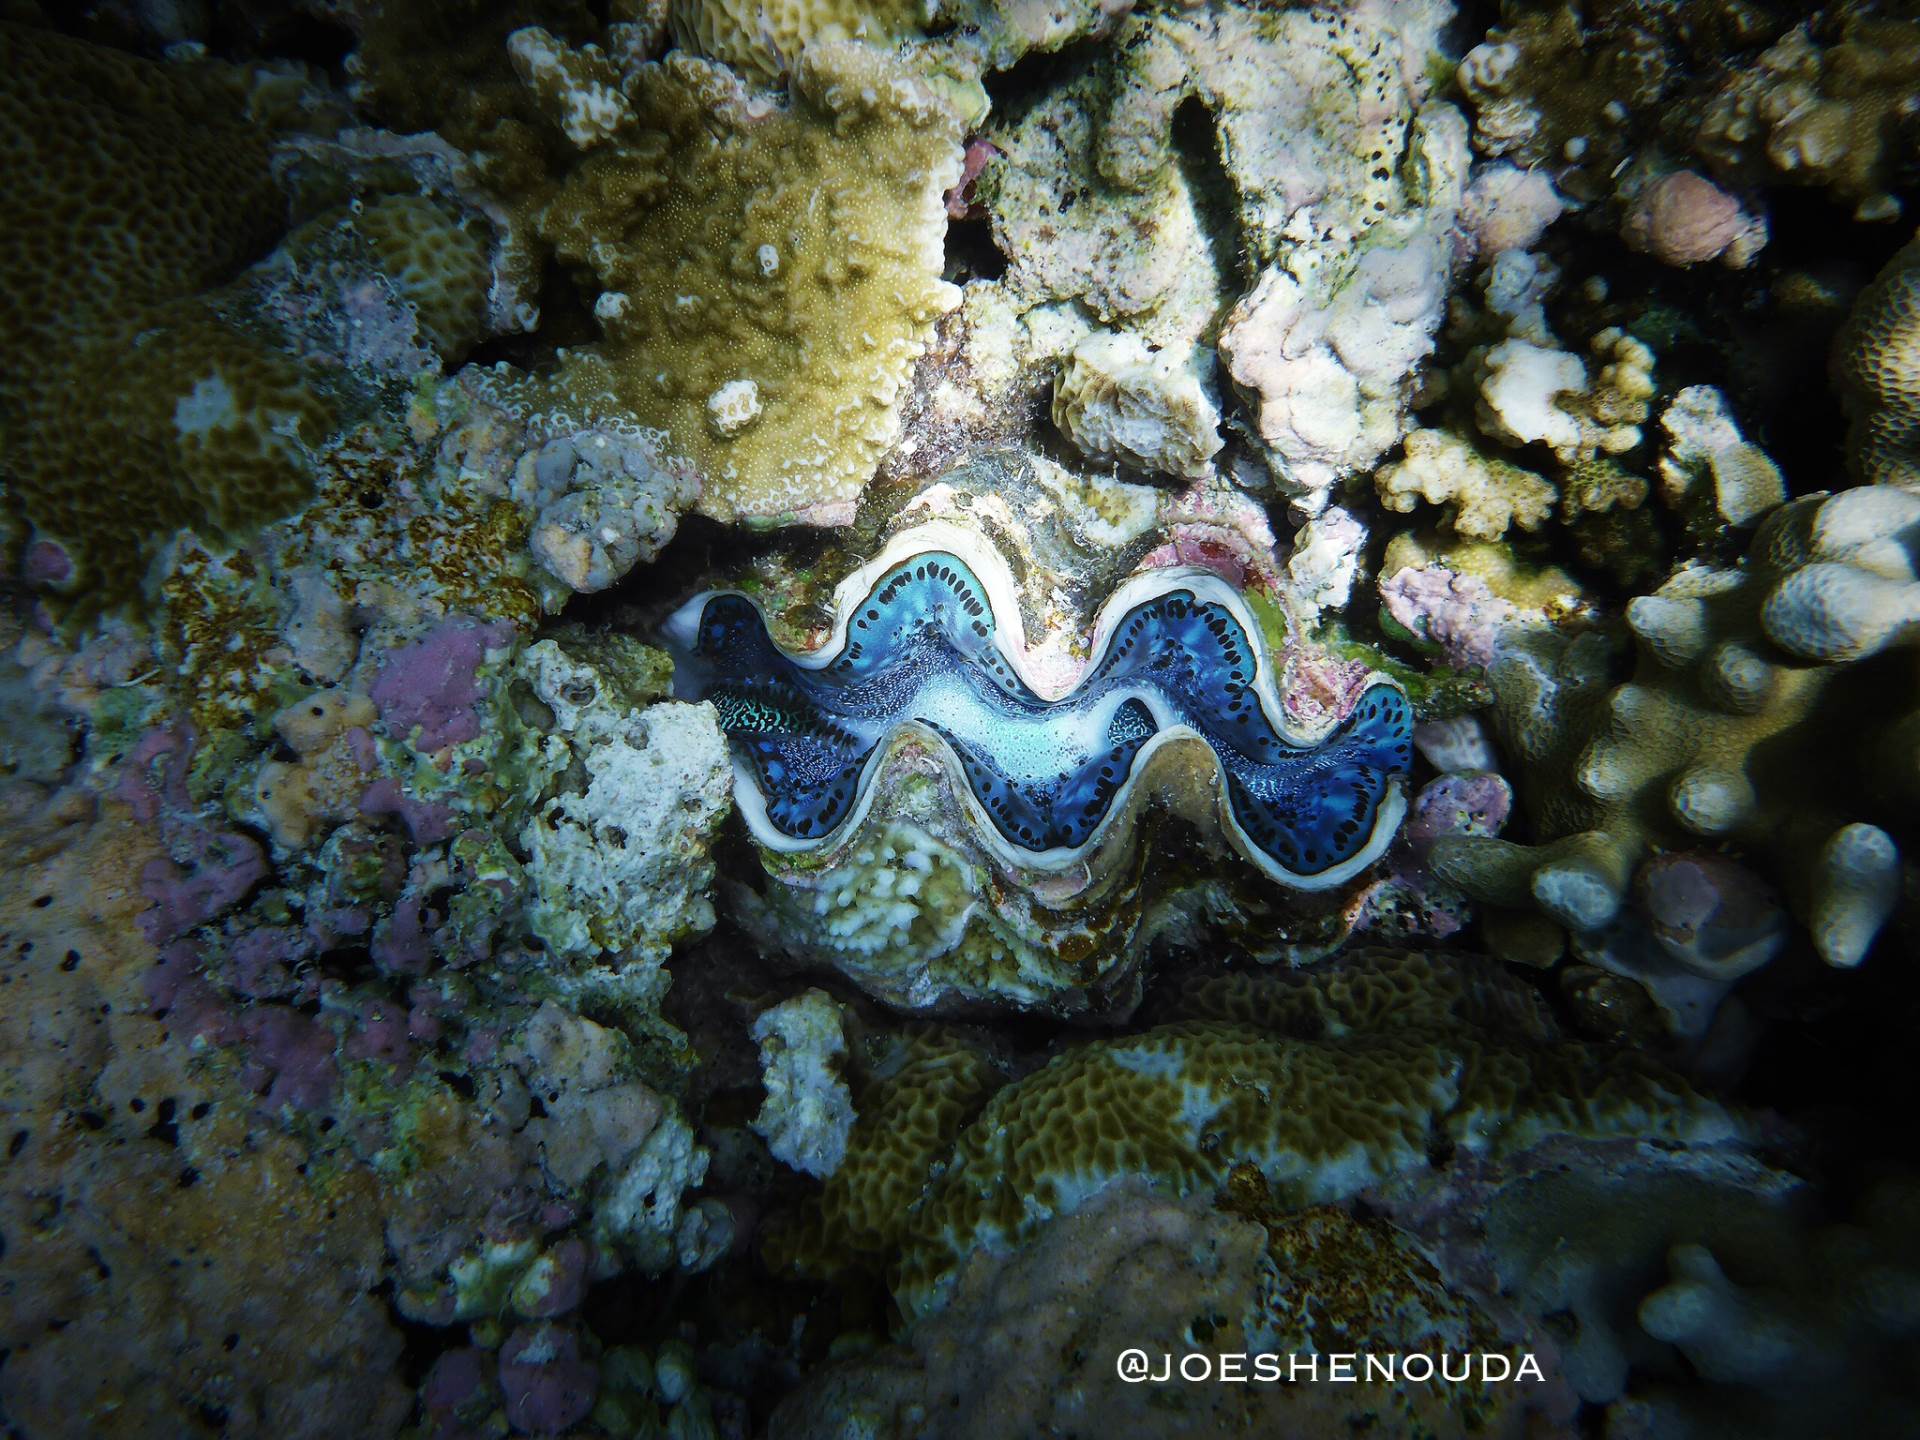 Palau  is home to 8️⃣ of the  known species of giant clams  , making it one of the epicenters of giant clam diversity in the world  .